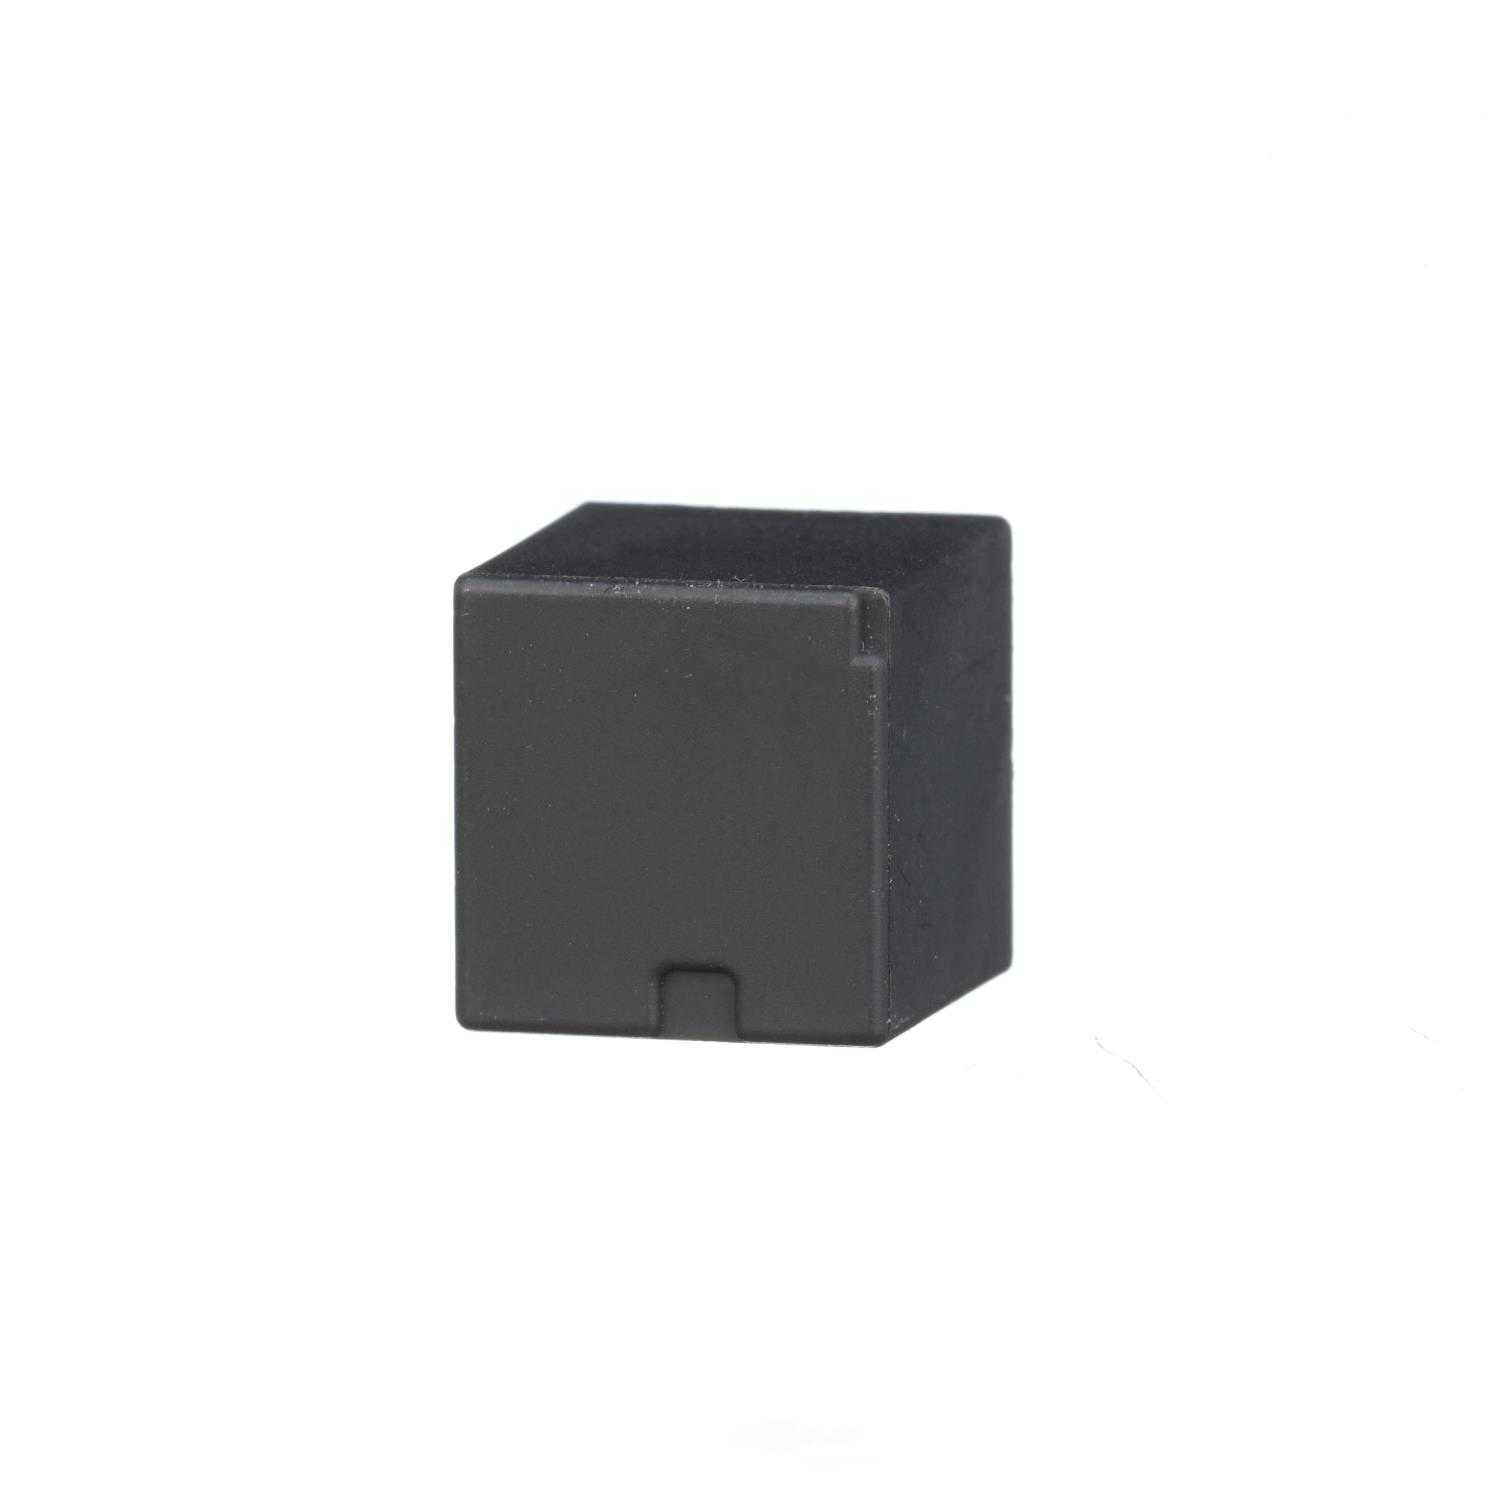 STANDARD MOTOR PRODUCTS - Multi Purpose Relay - STA RY-785